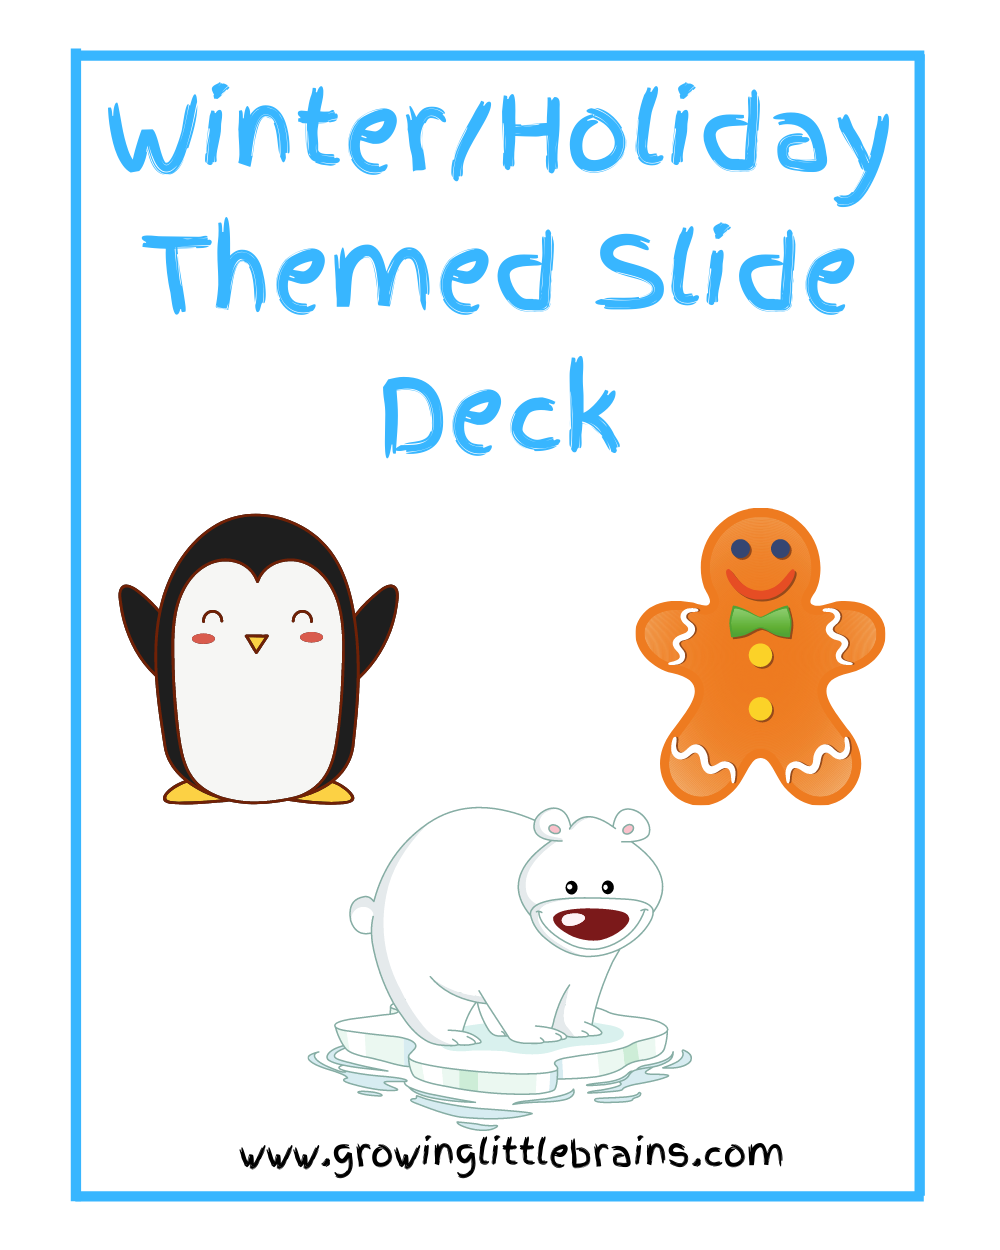 Winter & Holiday themed slide deck.png